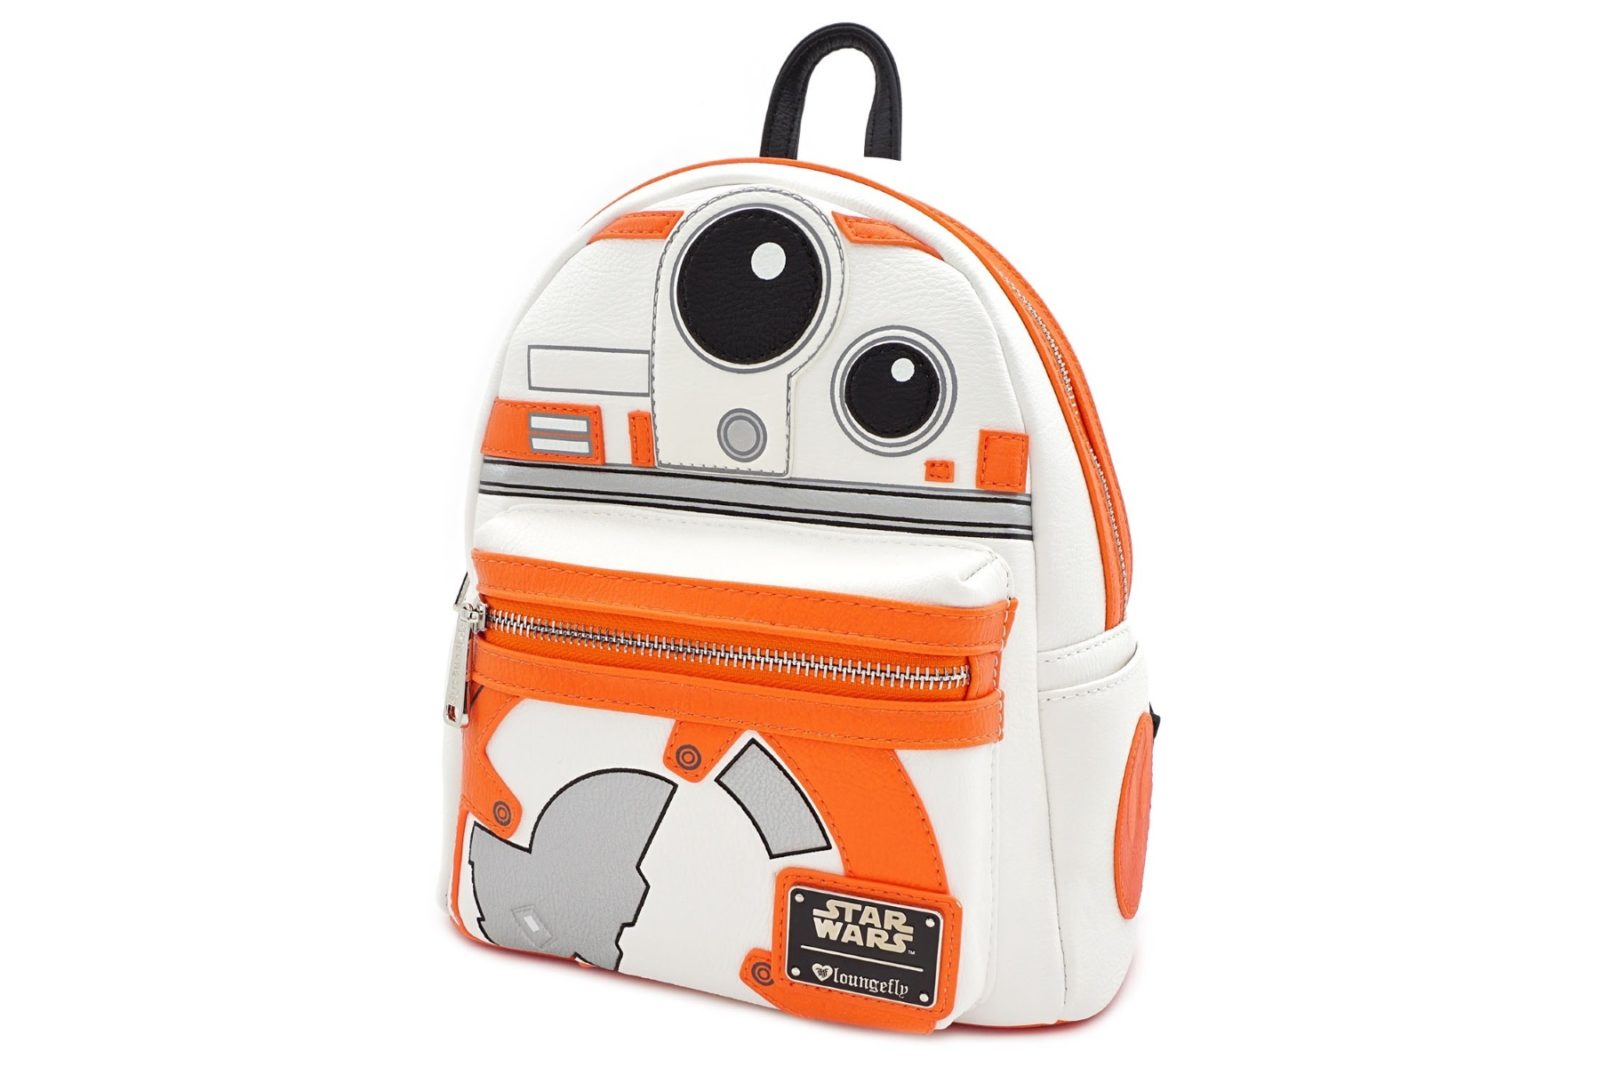 Loungefly BB-8 Mini Backpack on Sale!